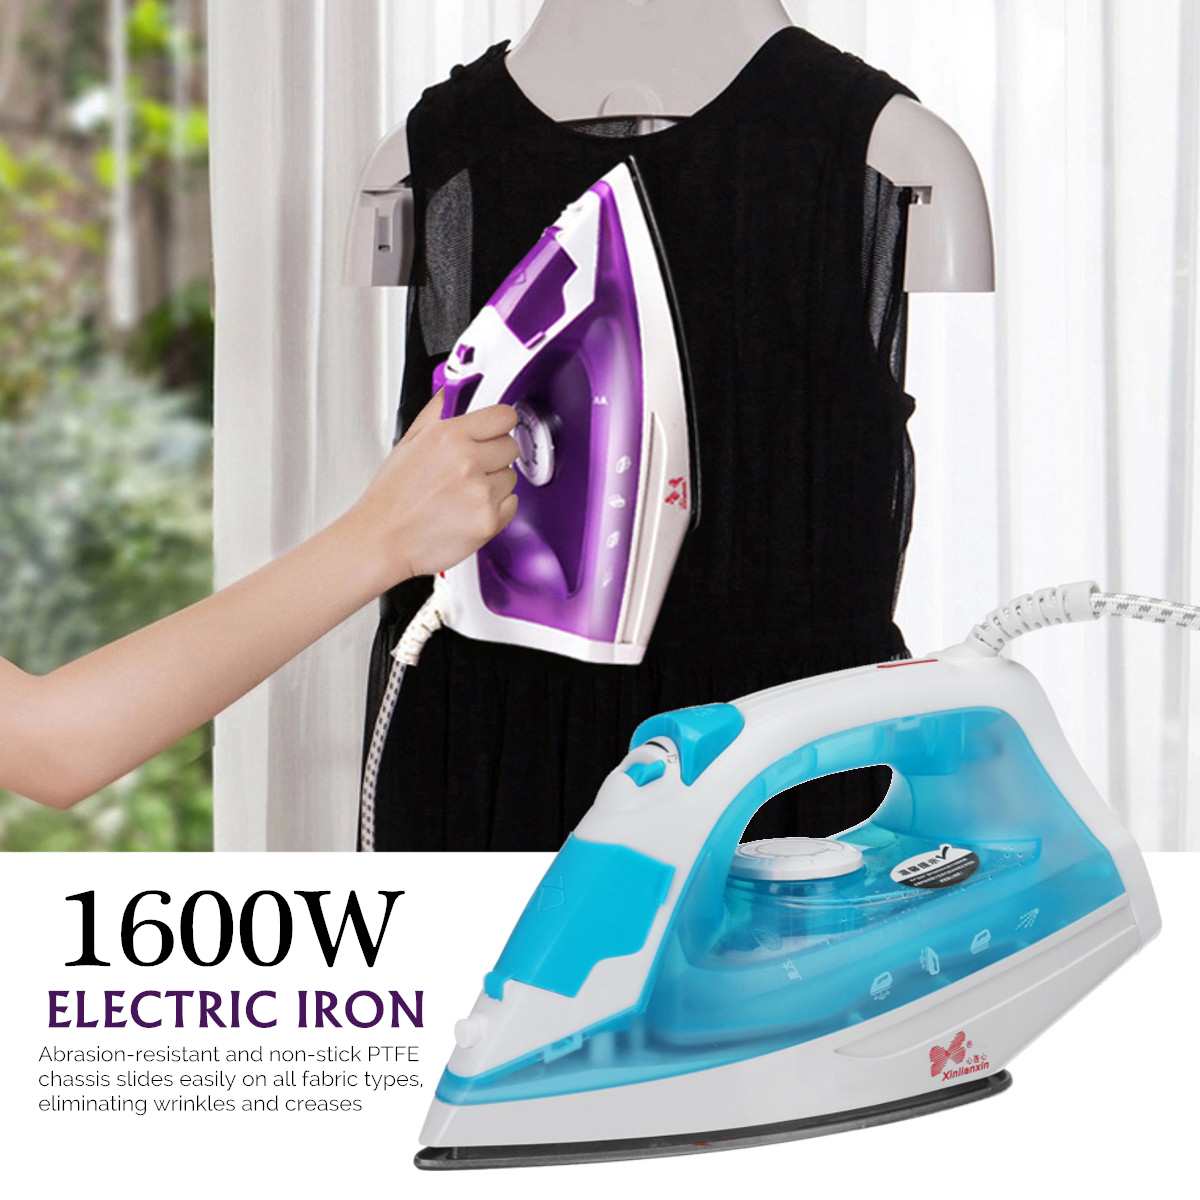 150ML Electric Irons 5 Levels Adjustable Garment Steam Irons Portable Ironing Steamer Clothing Laundry Appliance 1600W 220V